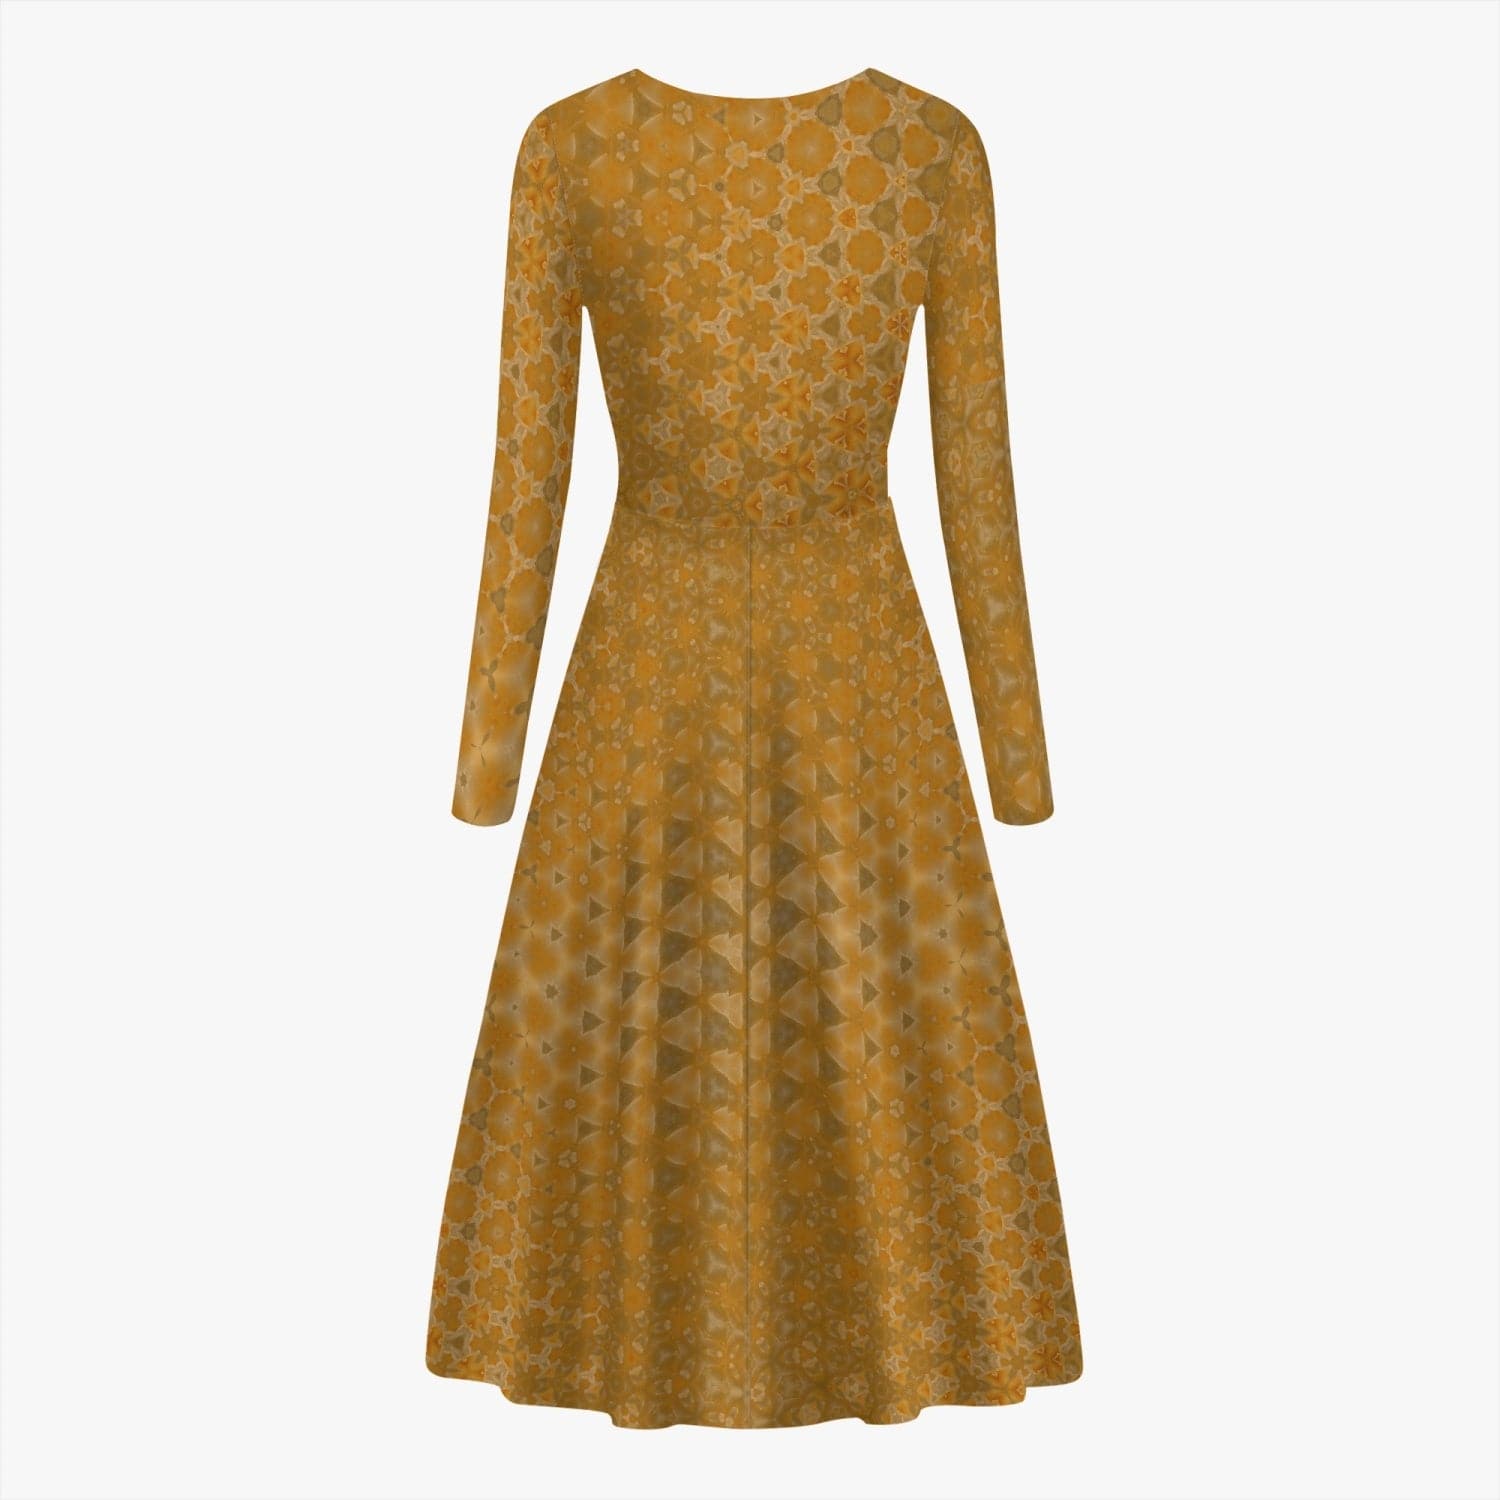 Shades of a Yellow Rose, Women's Long-Sleeve One-piece Dress, by Sensus Studio Design